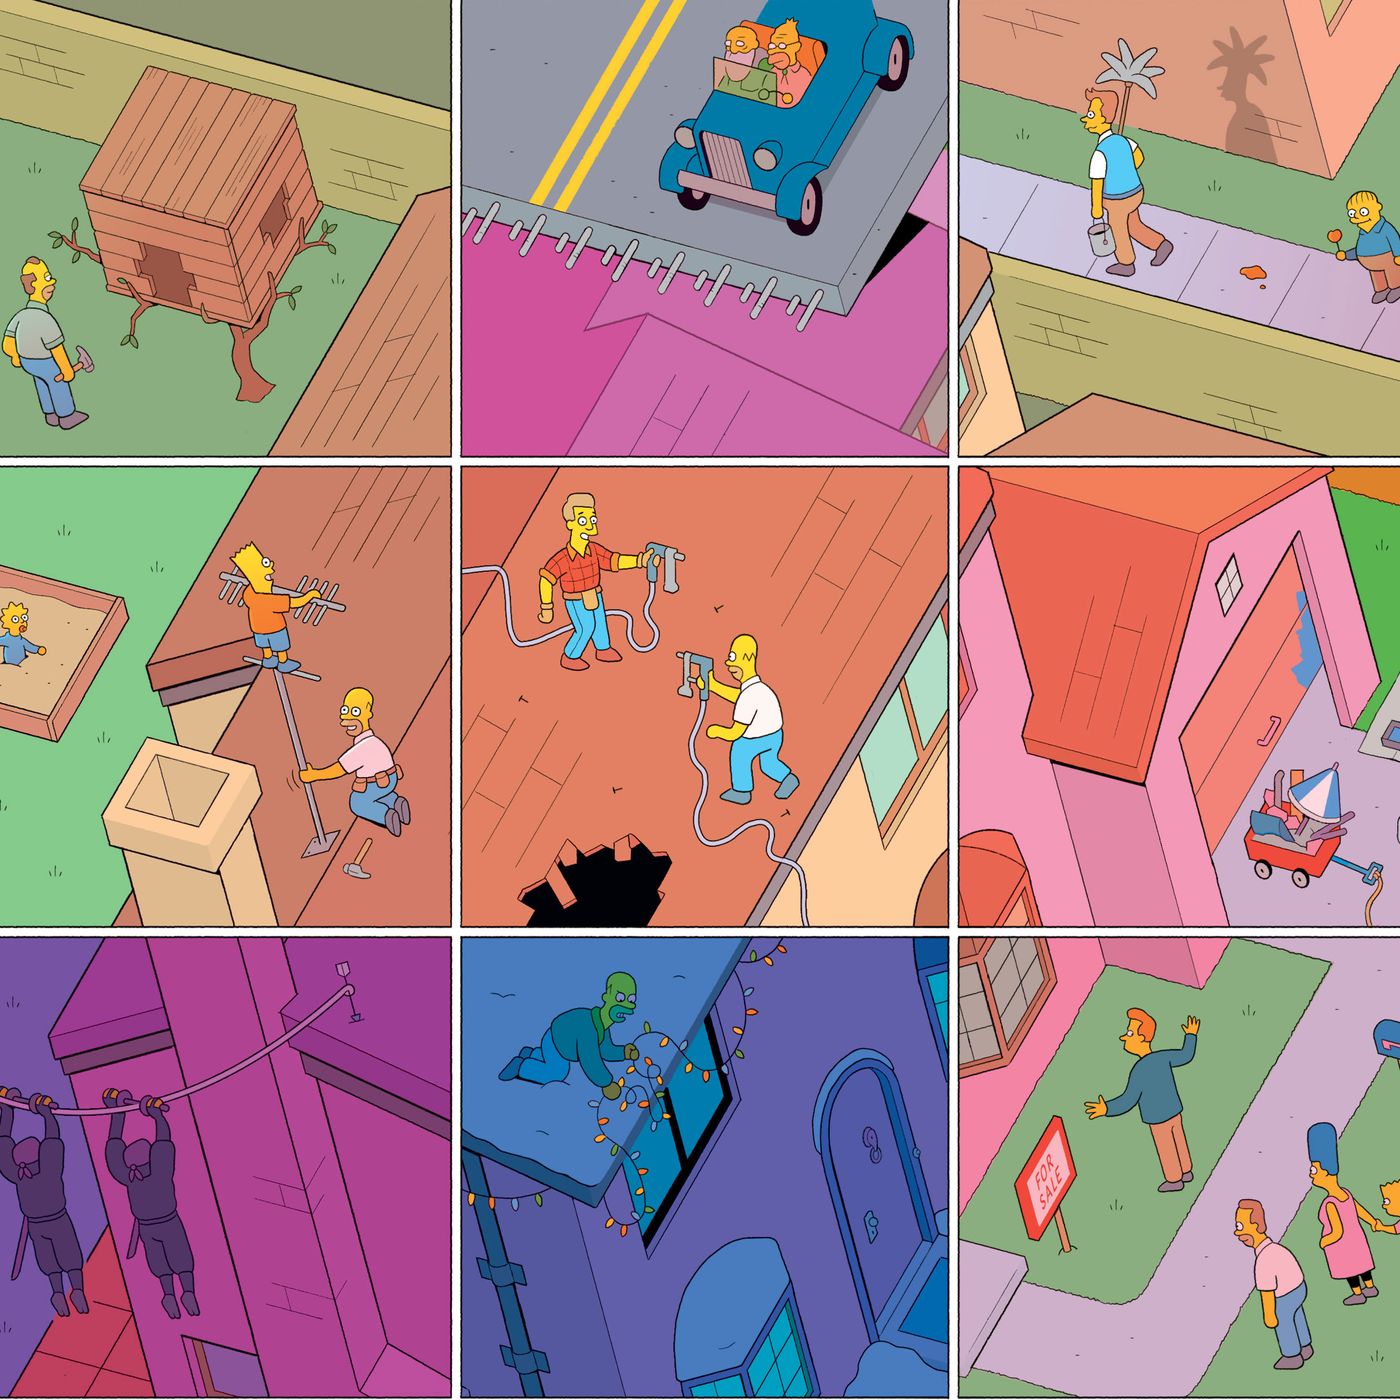 Have You Watched 'The Simpsons' Lately? Because You Should!